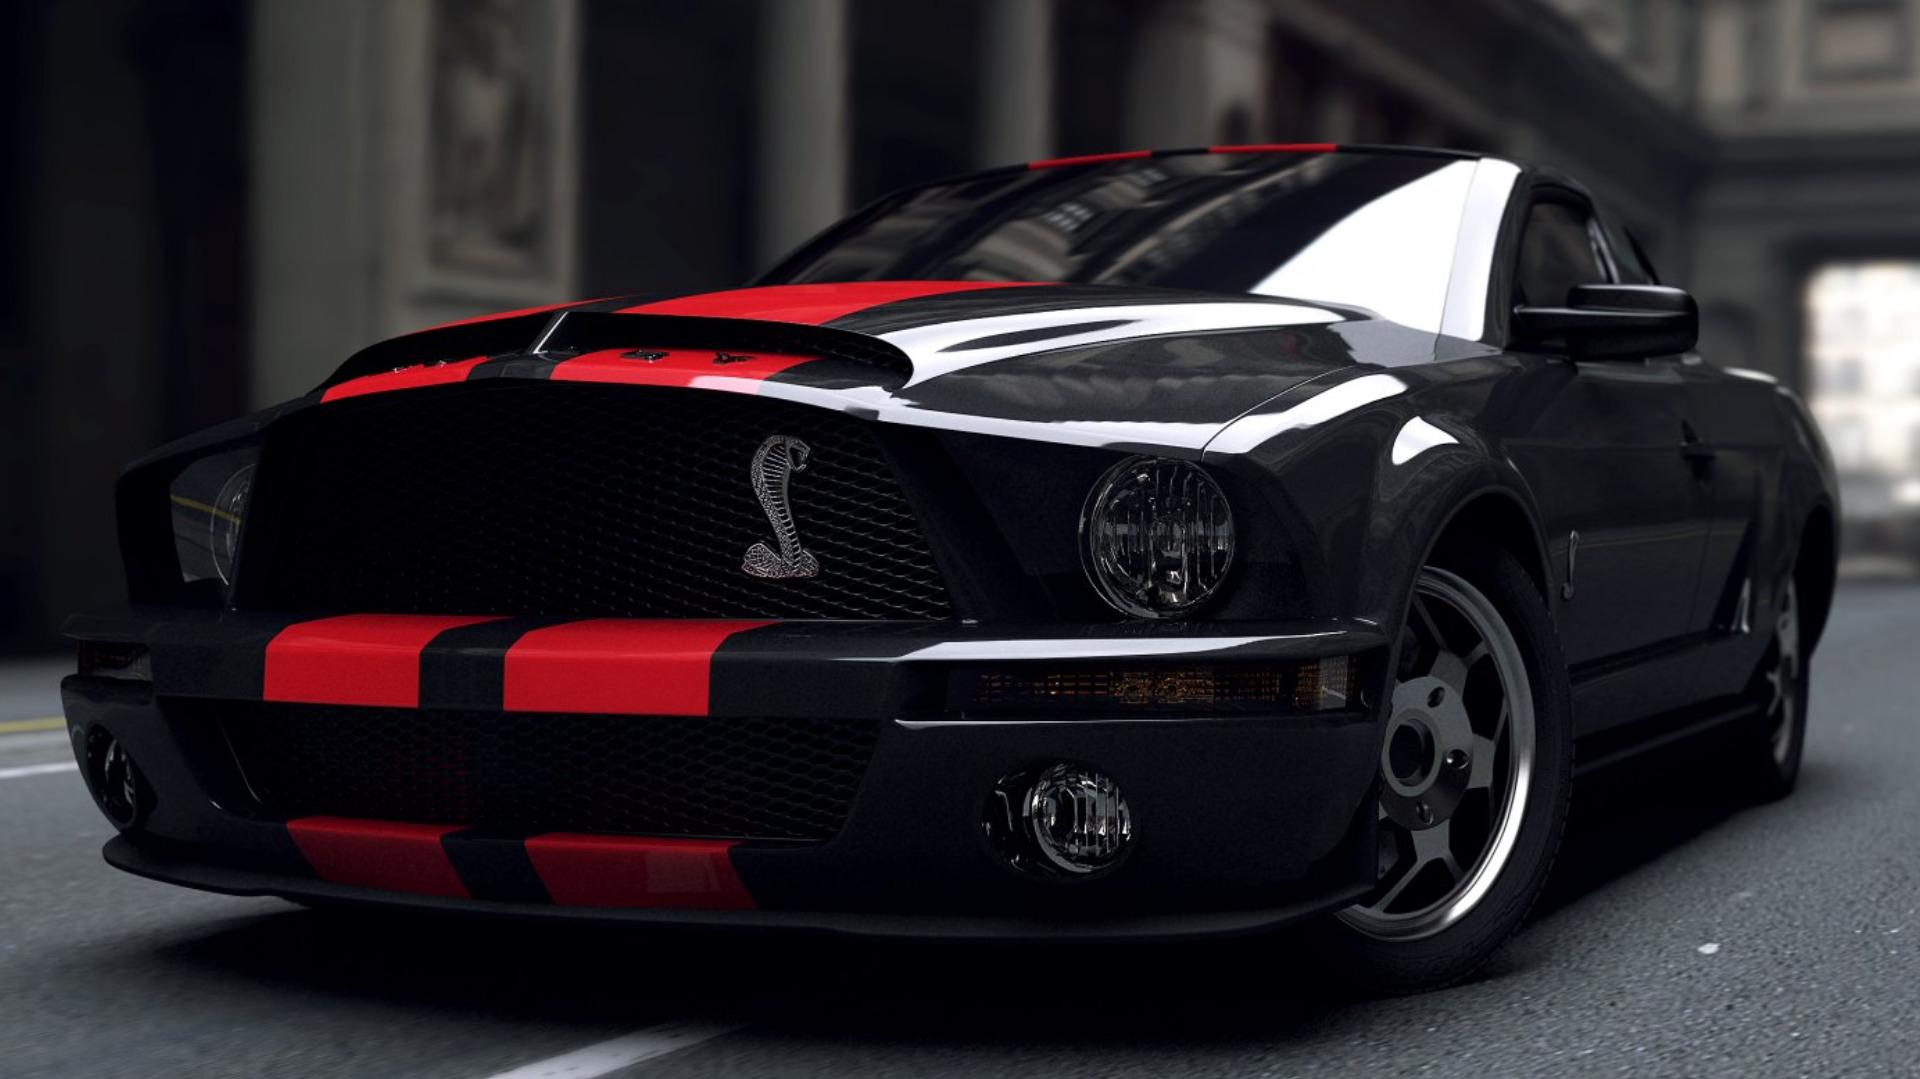 Ford Mustang Shelby Gt500 HD Wallpaper